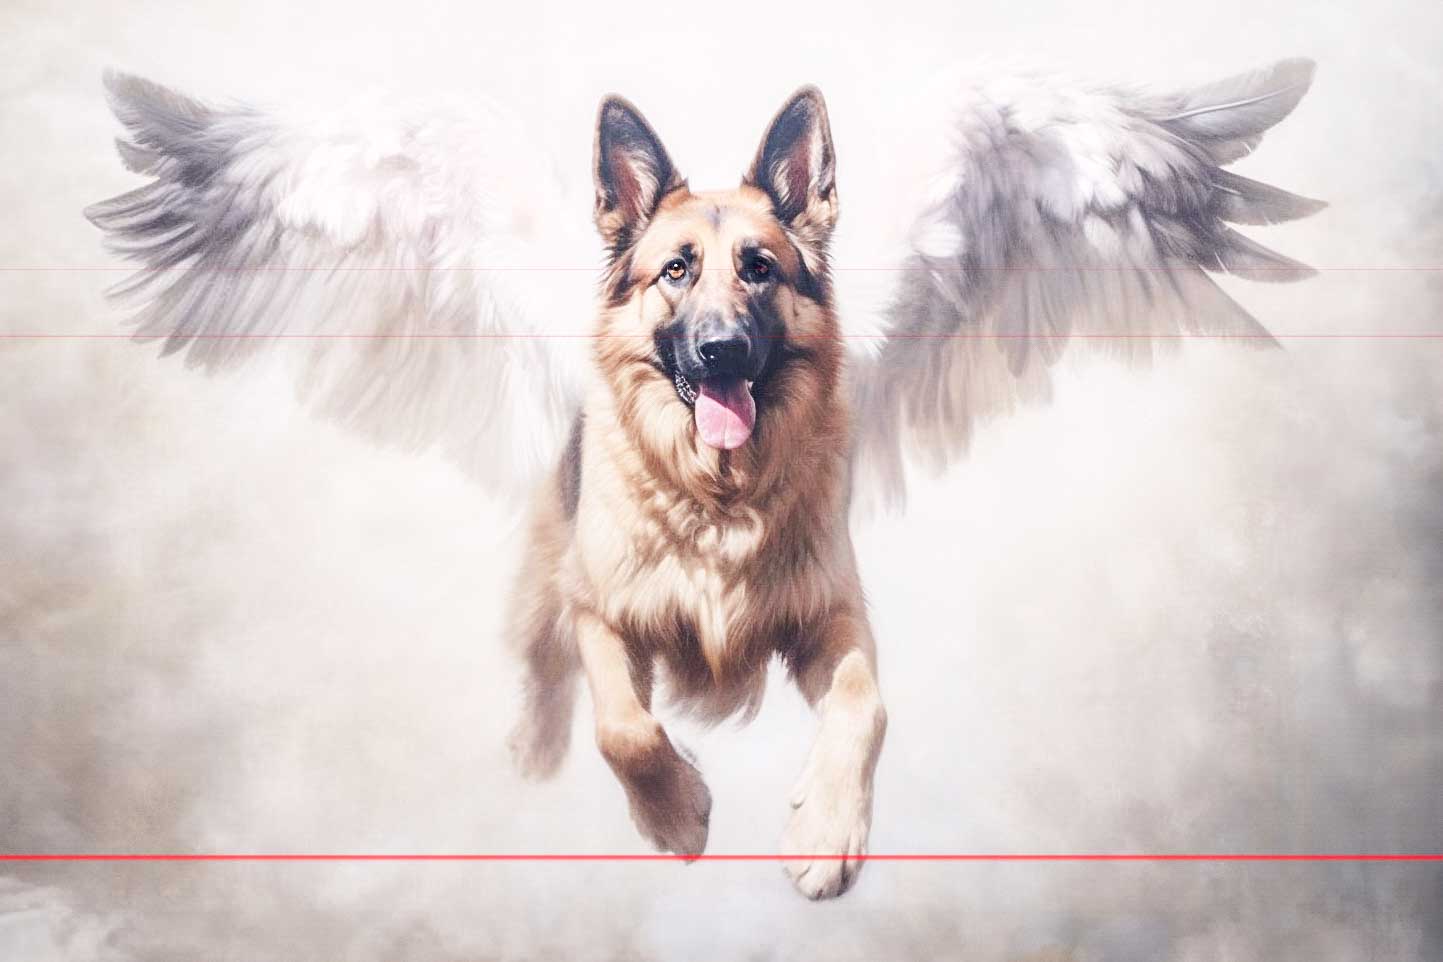 An embellished picture of a German Shepherd mid-air with large, mystical angel's wings protruding from its back. The dog appears to be flying with its tongue out and ears perked up against a cloudy, ethereal background, coming down out of the clouds. The feathered wings blend naturally with the dog's fur.